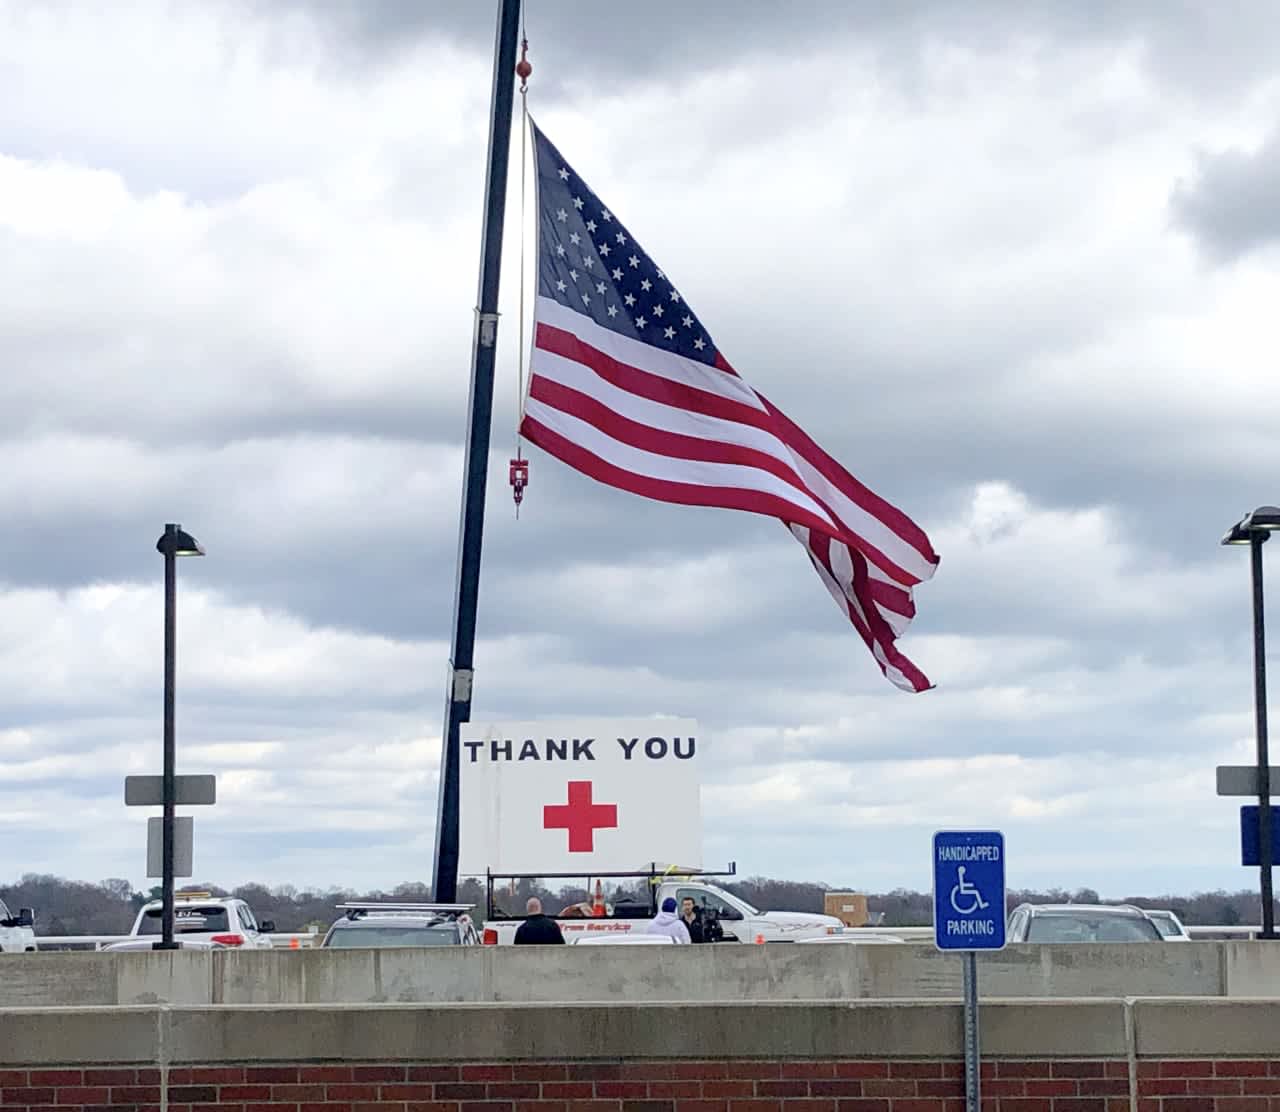 “I just wanted to communicate thanks through this sign and show community support,” said DeLucia. “We’re hearing what they’re going through and how hard they’re working—all of them: doctors, nurses, technicians, sanitation, facilities.”